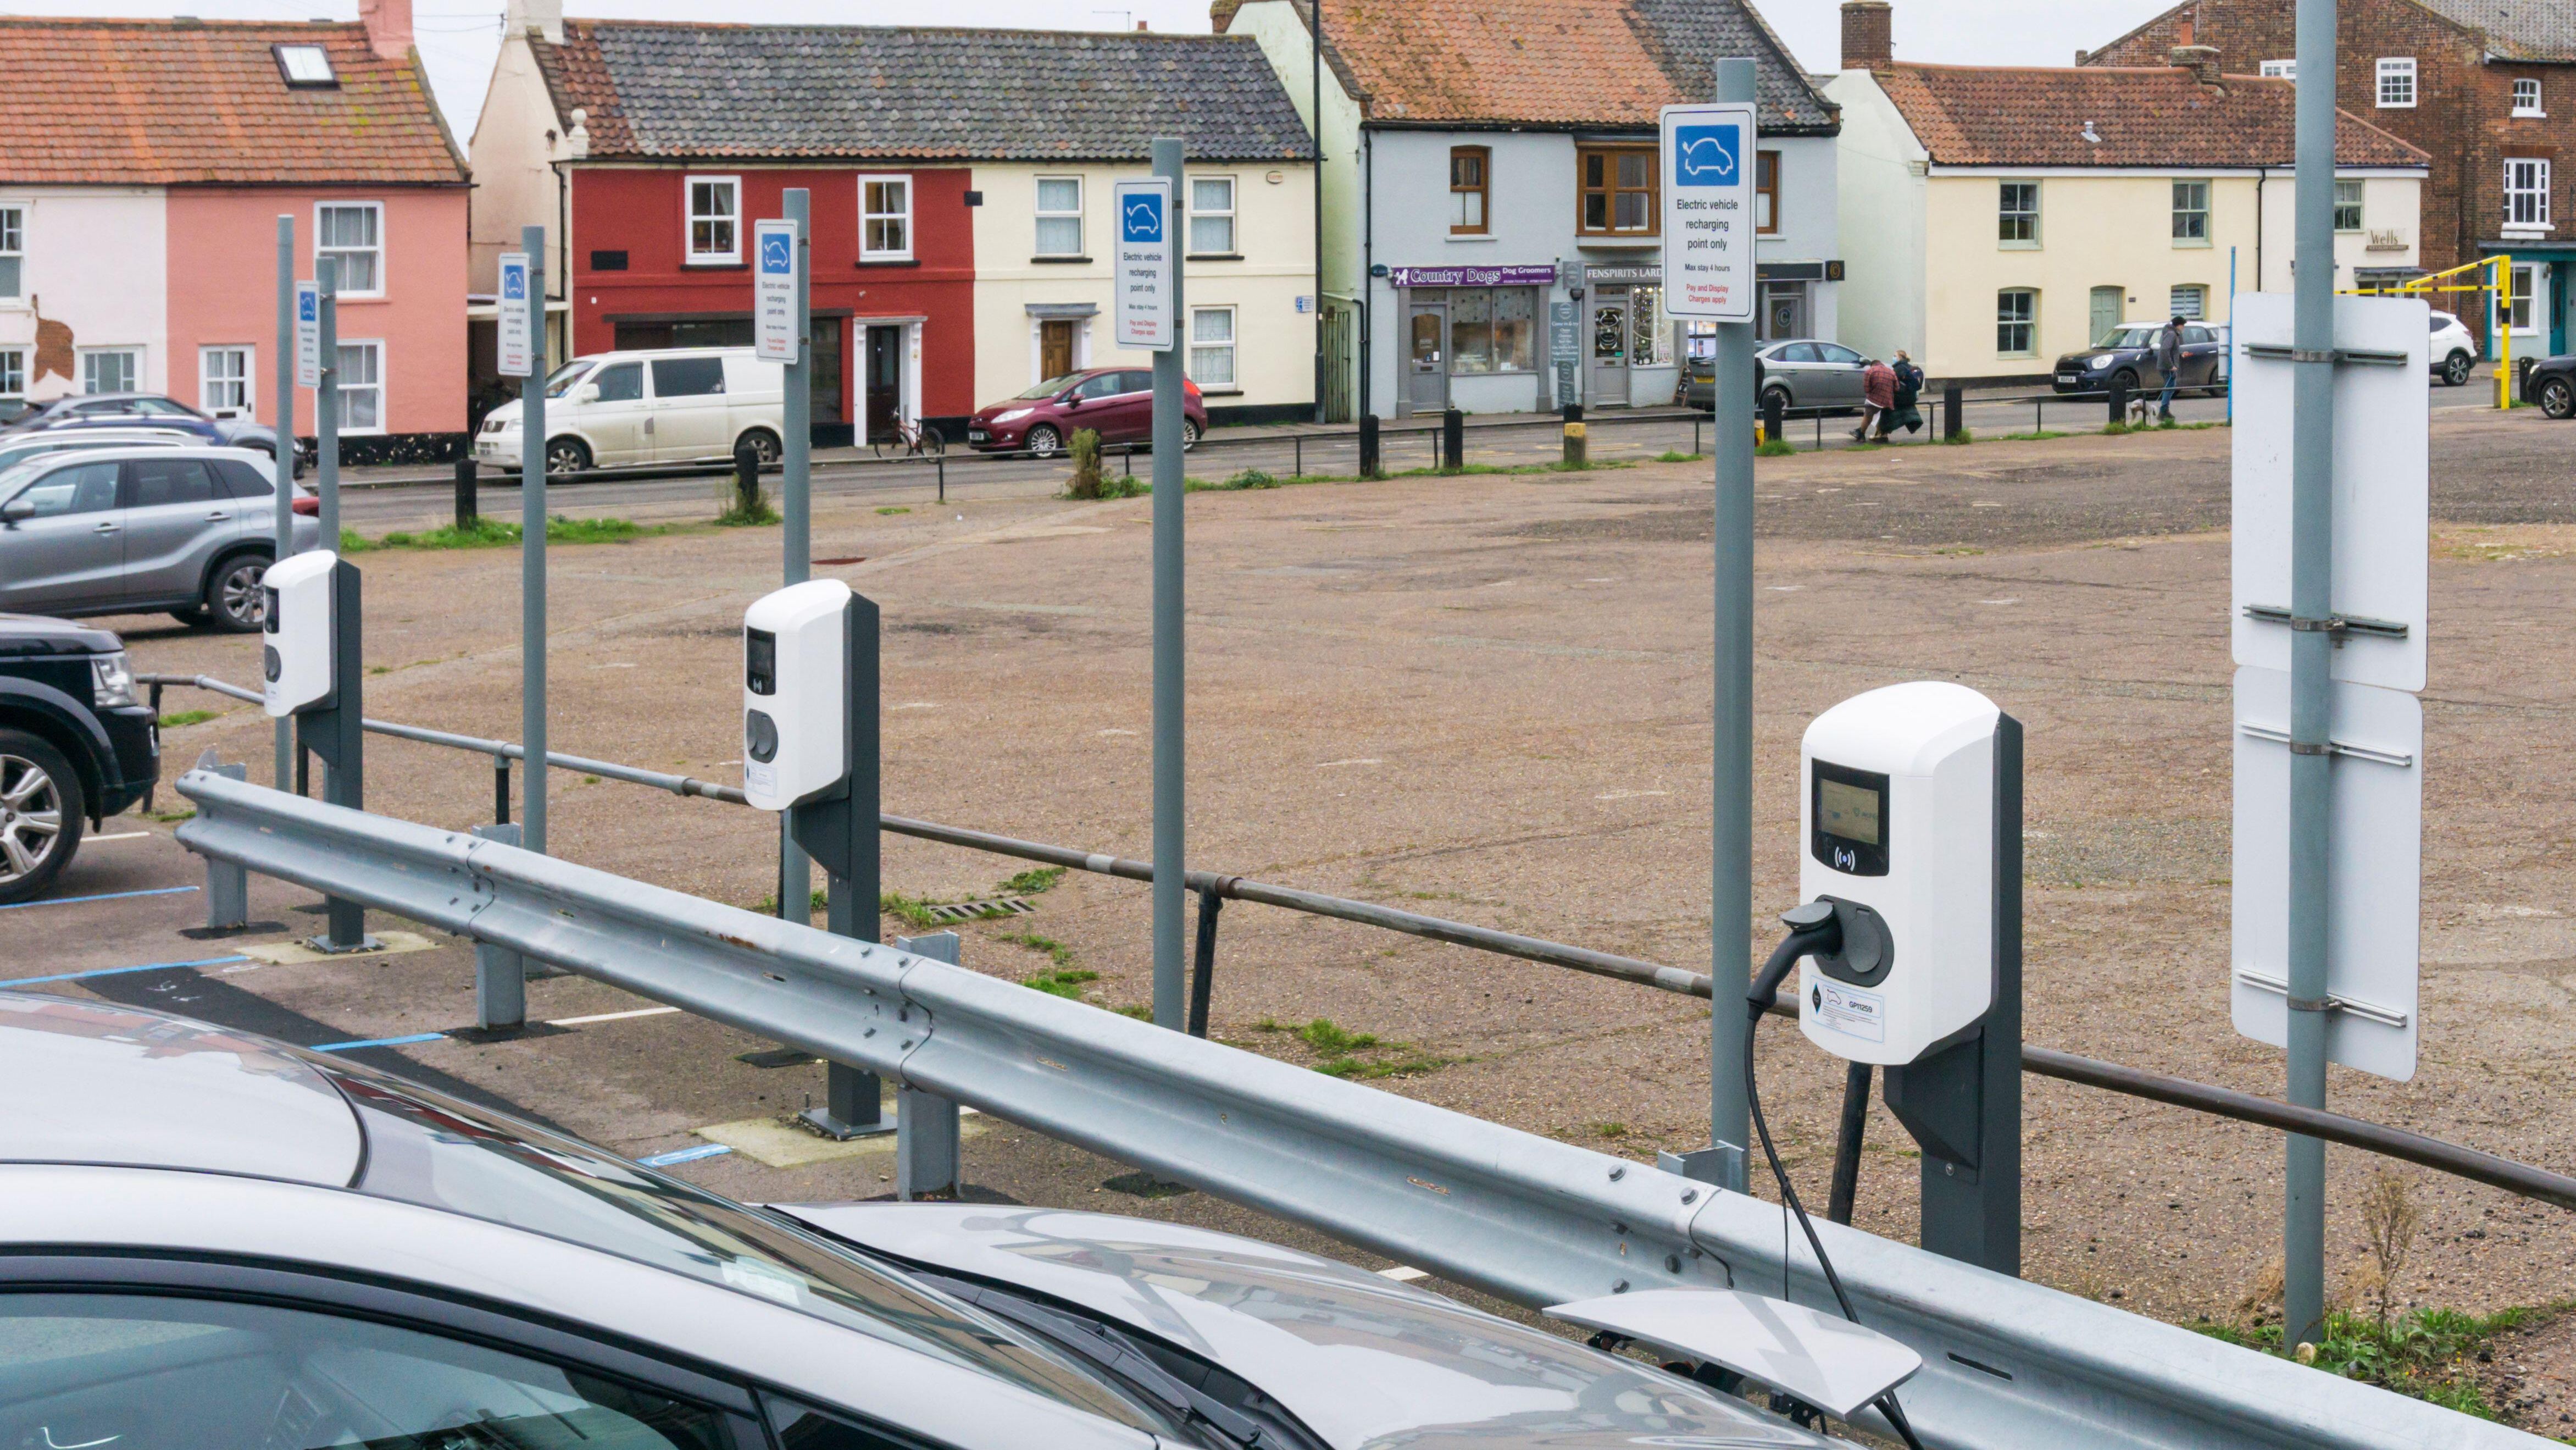 Work starts to install electric vehicle charging points in West Norfolk